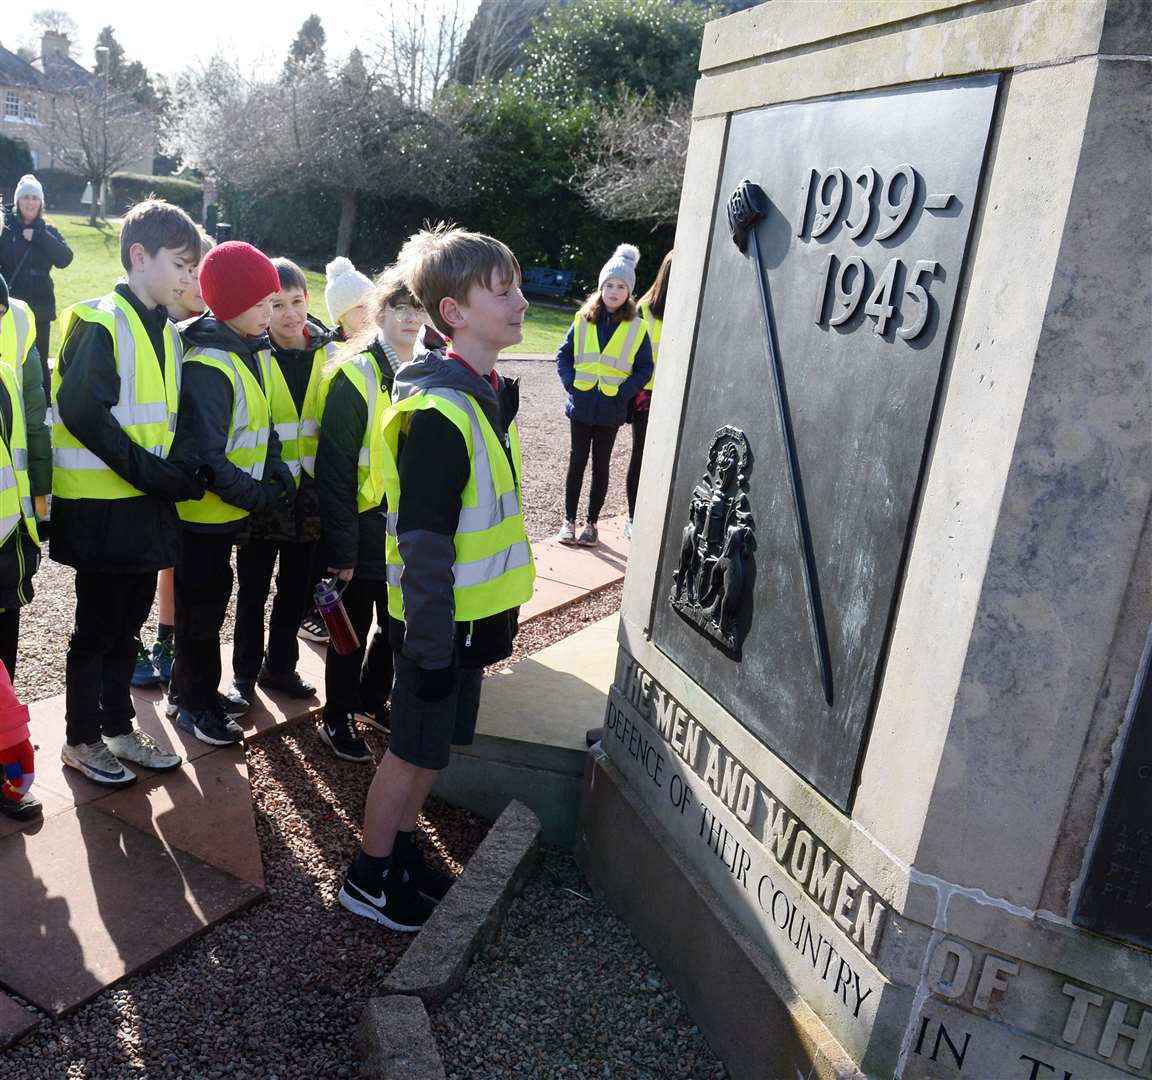 Pupils from Holm Primary School in Inverness visit the city's war memorial in Cavell Gardens as part of WWII project. Pictures: Gary Anthony.